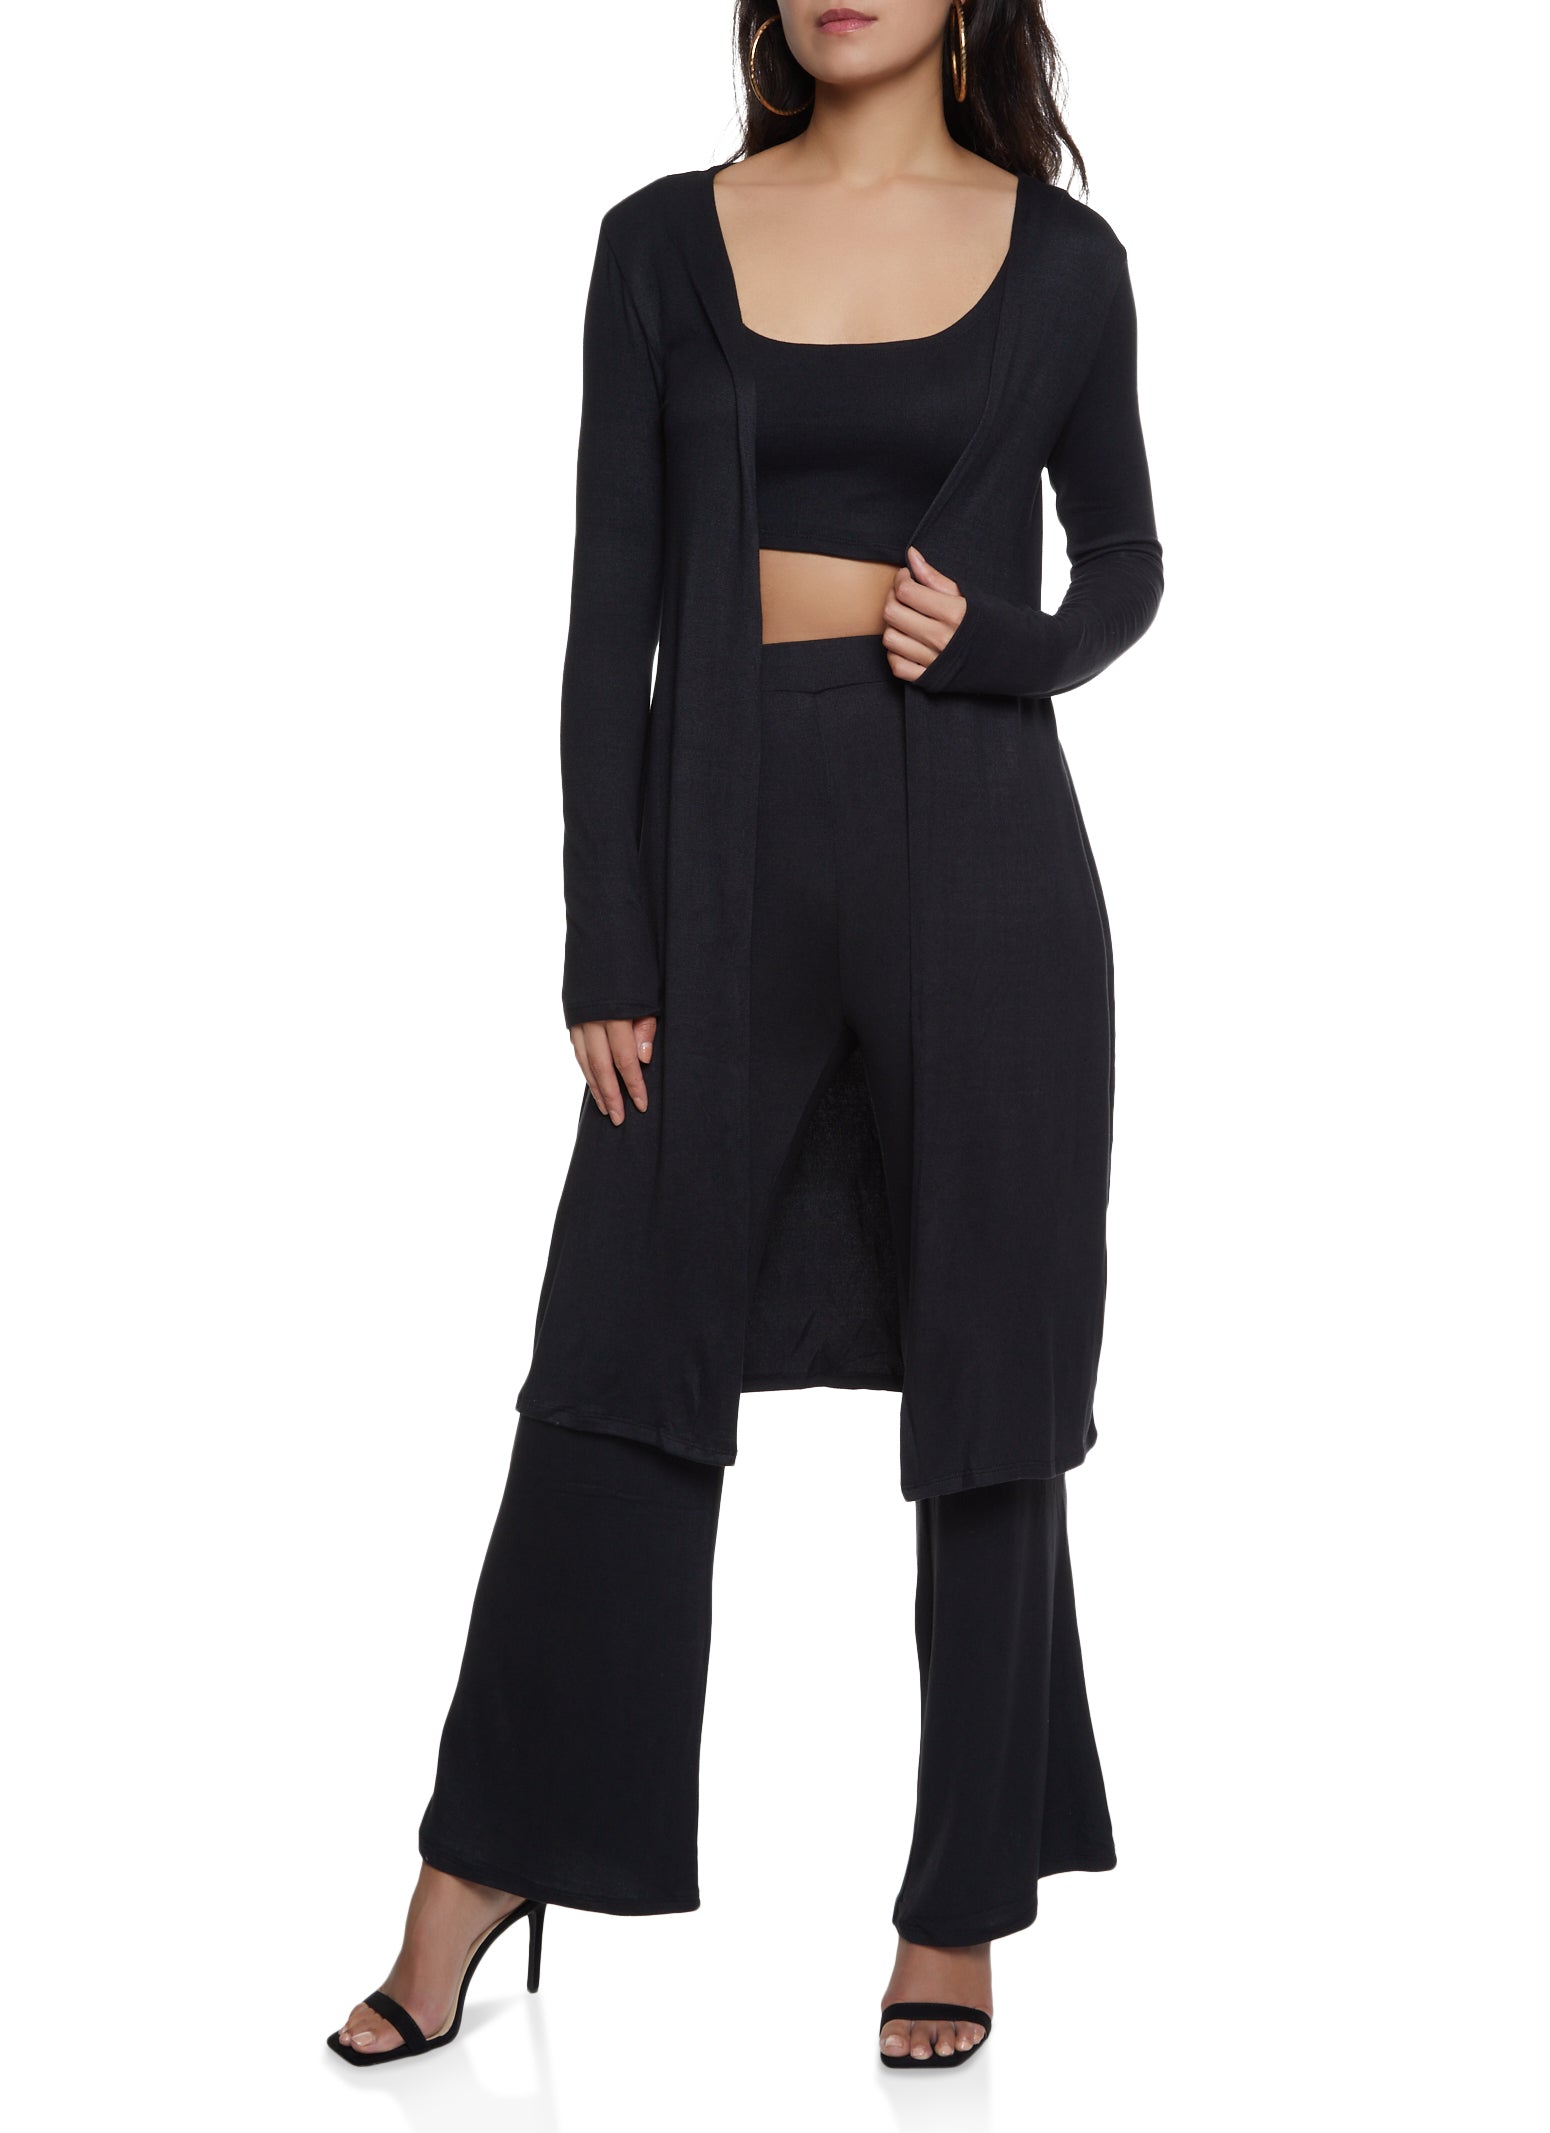 Solid Duster with Crop Top and Pants - Black